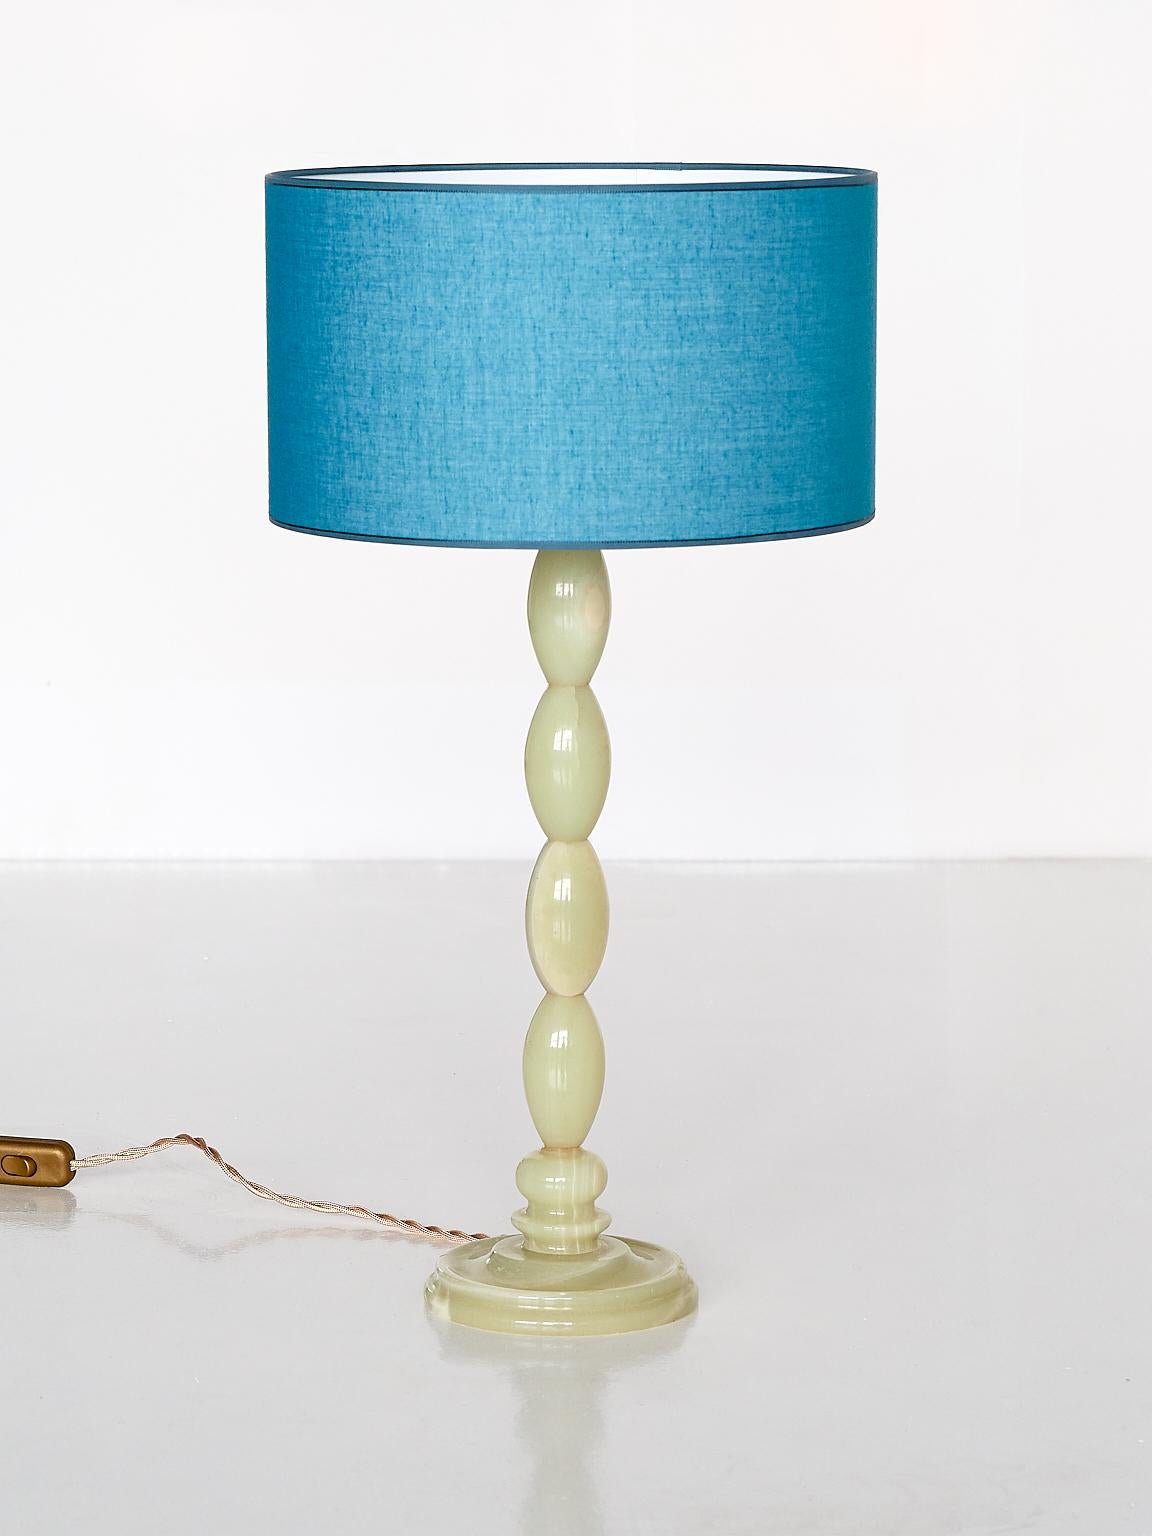 This elegant table lamp was produced in France in the late 1970s. The base consists of four stacked oval shapes, resting on a circular foot, all in light green onyx. The newly made blue shade allows for a pleasant and warm light distribution when